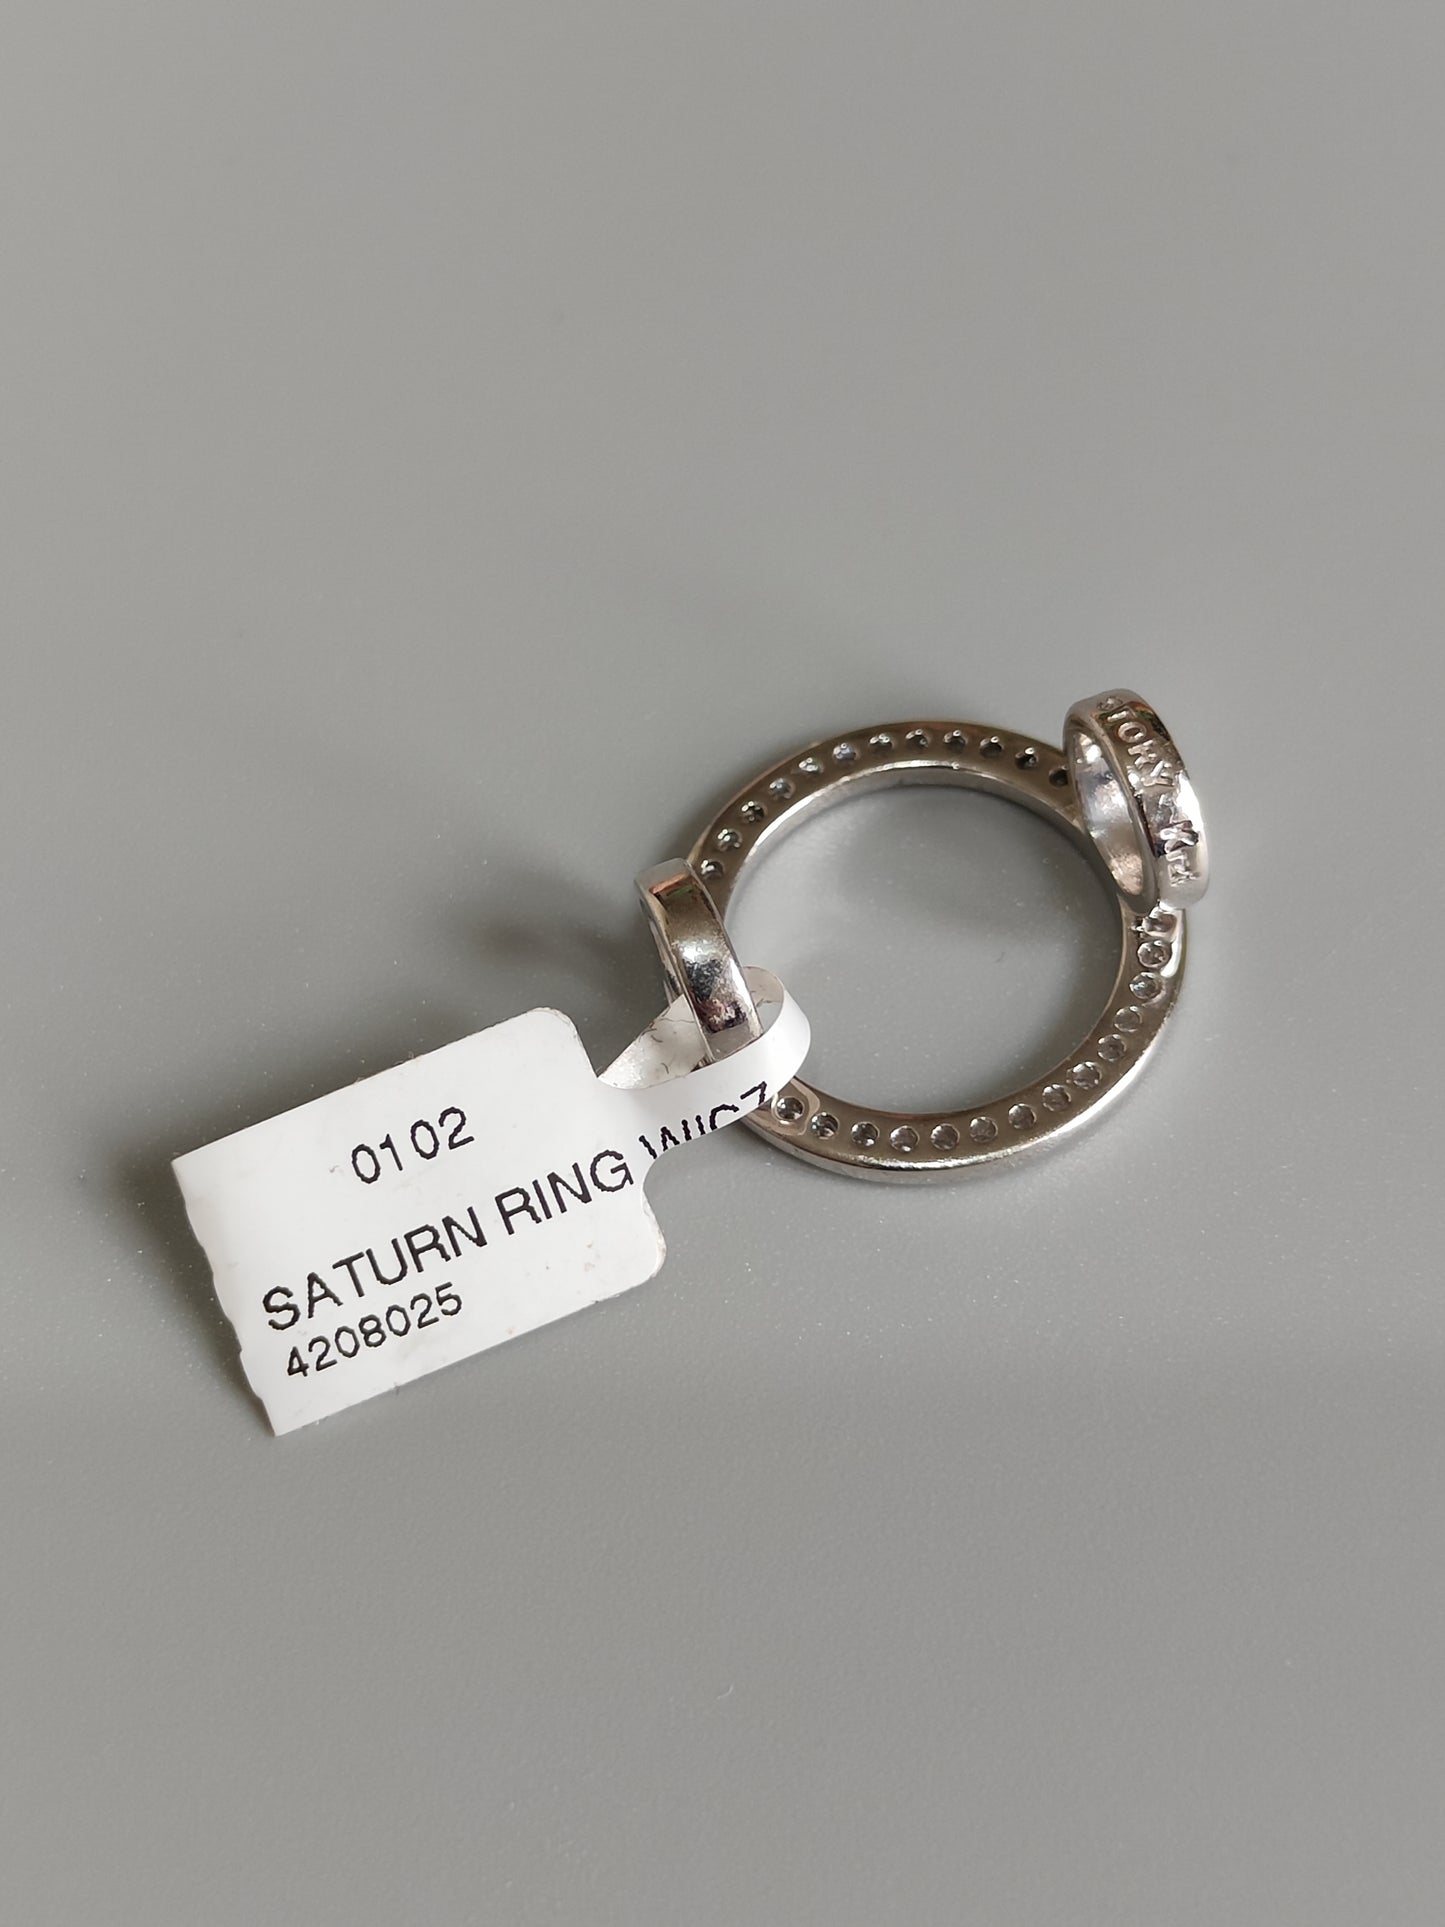 Silver Saturn Ring Charm